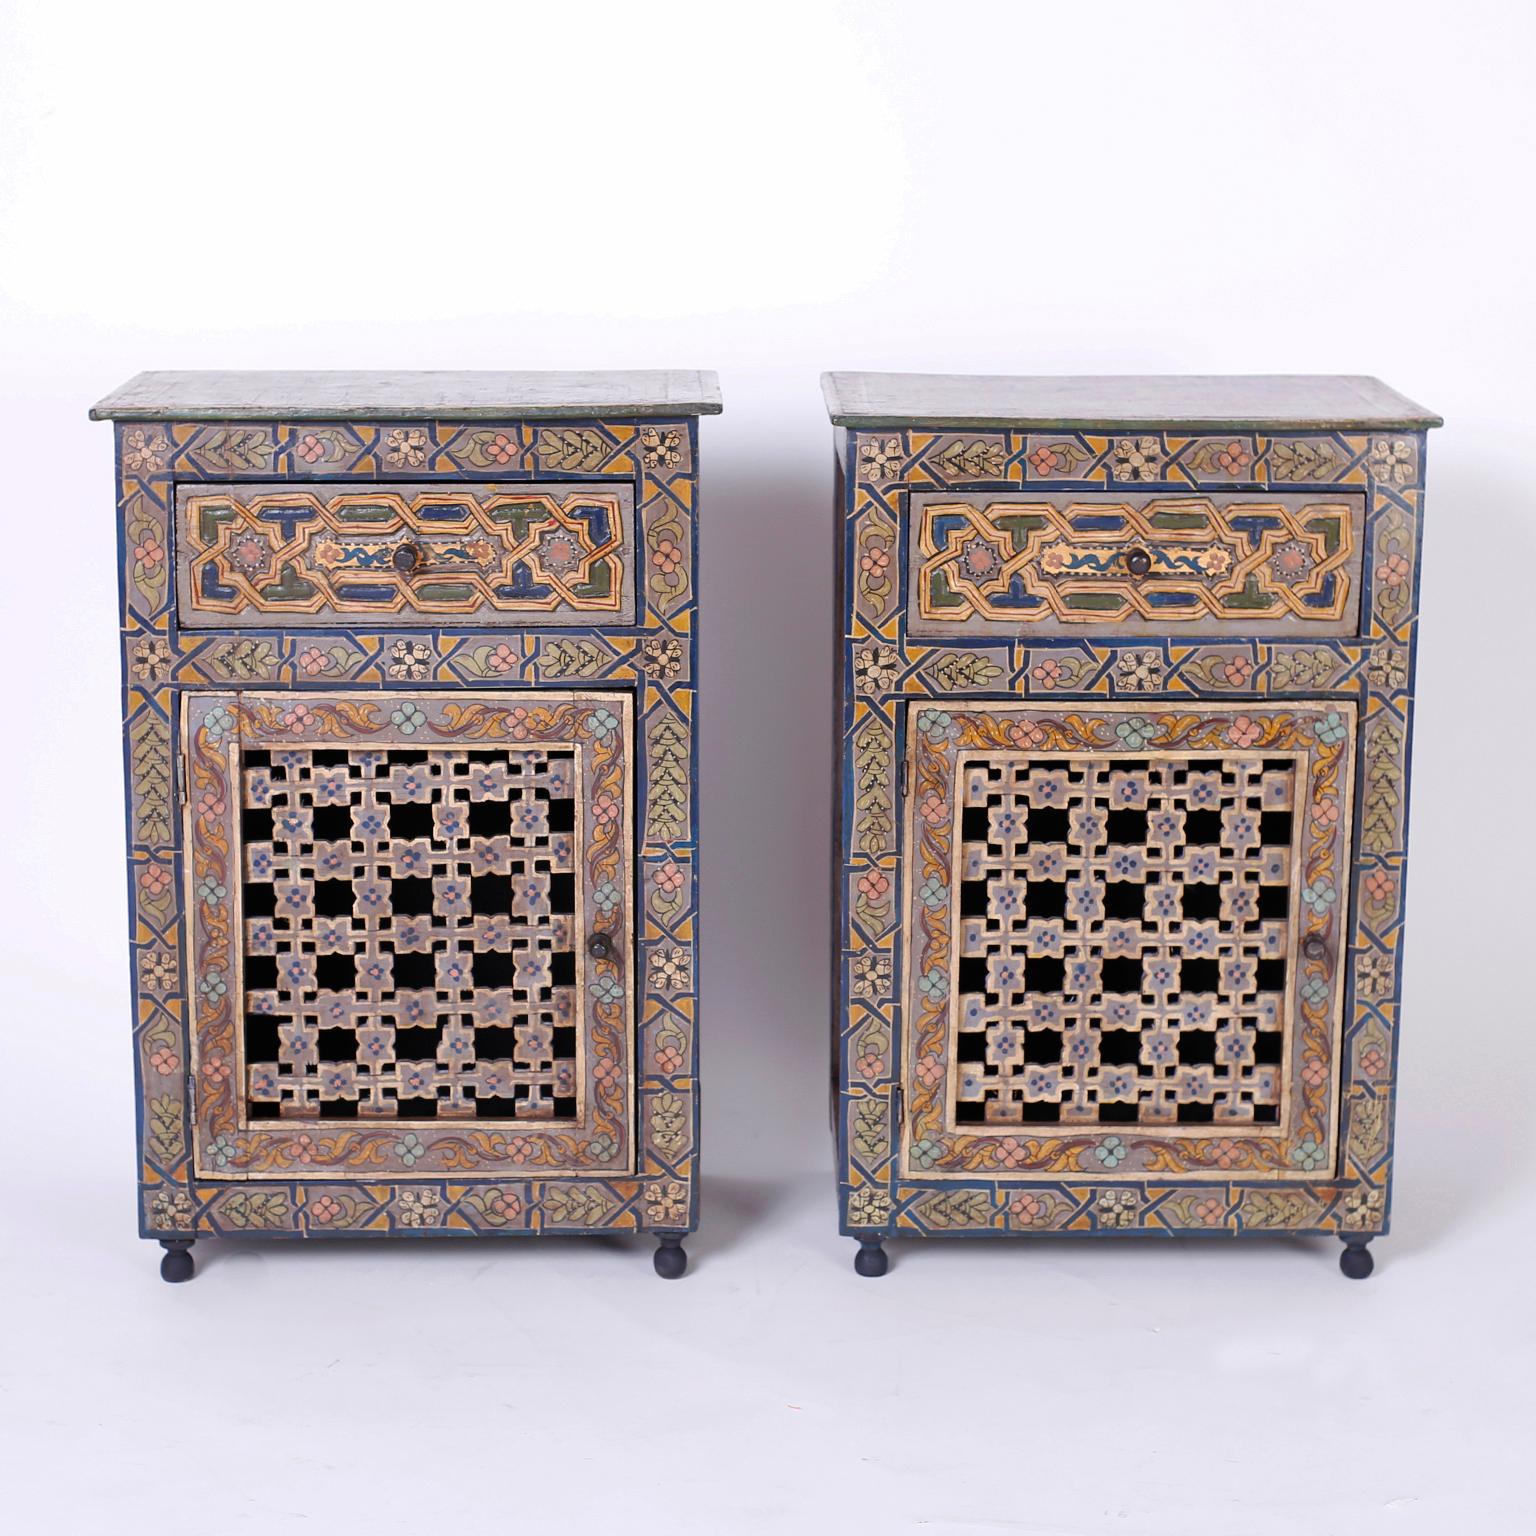 Pair of antique Moroccan stands decorated in a rustic folky style depicting Classic geometric and floral designs. Featuring one drawer over an open fretwork cabinet door and turned ball feet.
   